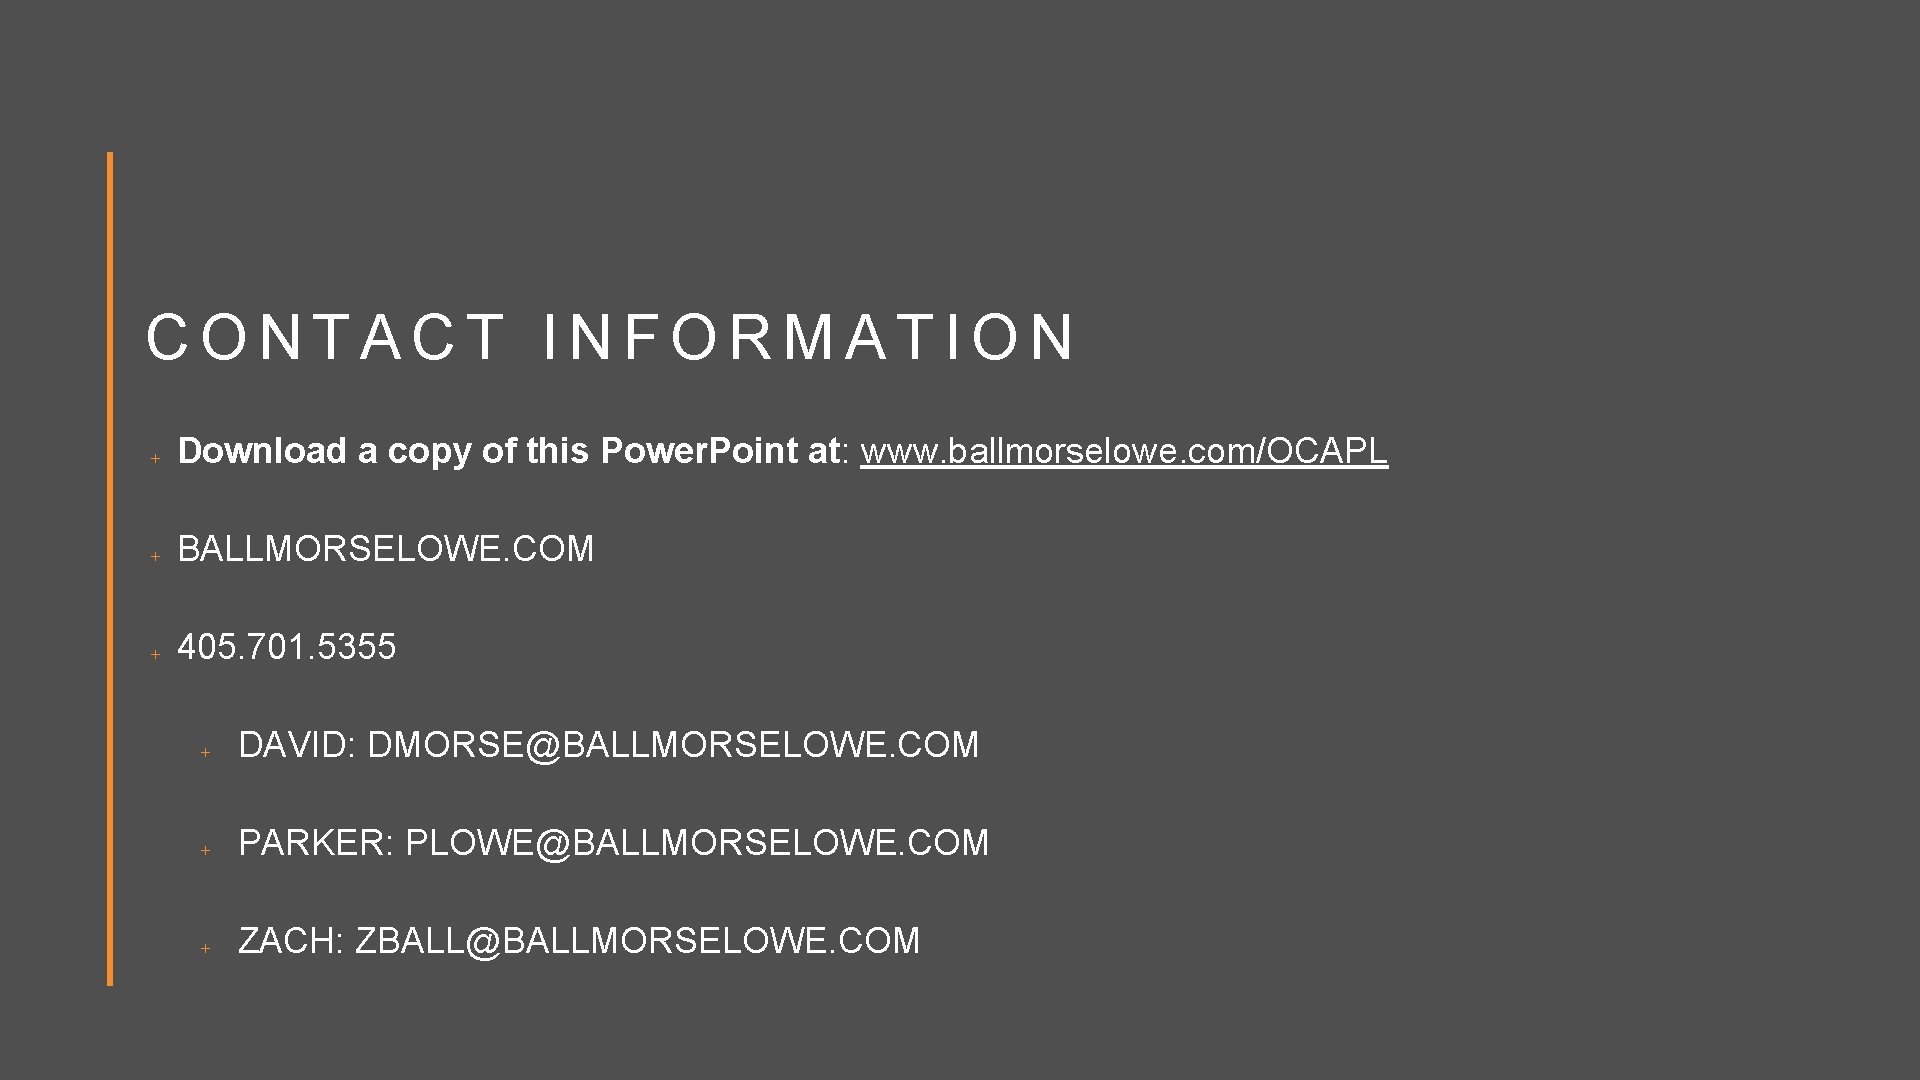 CONTACT INFORMATION Download a copy of this Power. Point at: www. ballmorselowe. com/OCAPL BALLMORSELOWE.